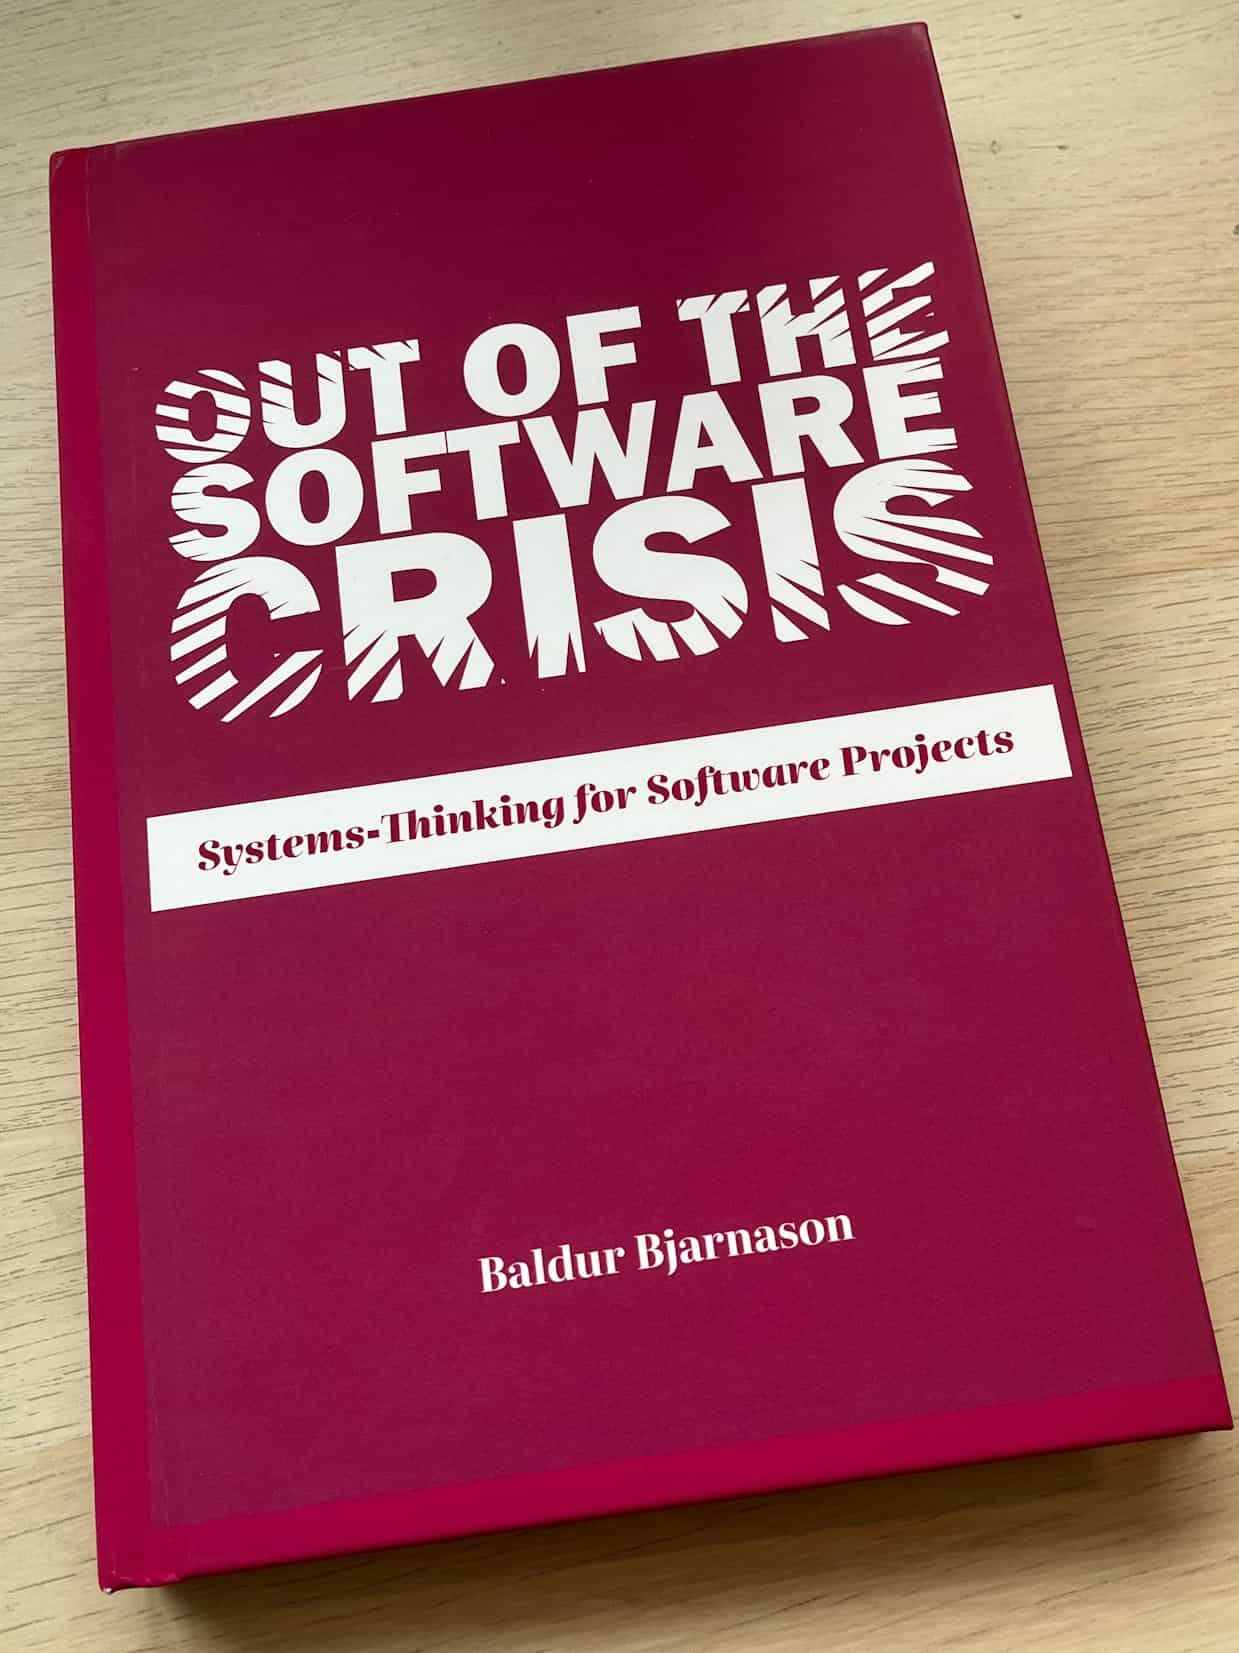 A sample print of the hardcover edition of Out of the Software Crisis